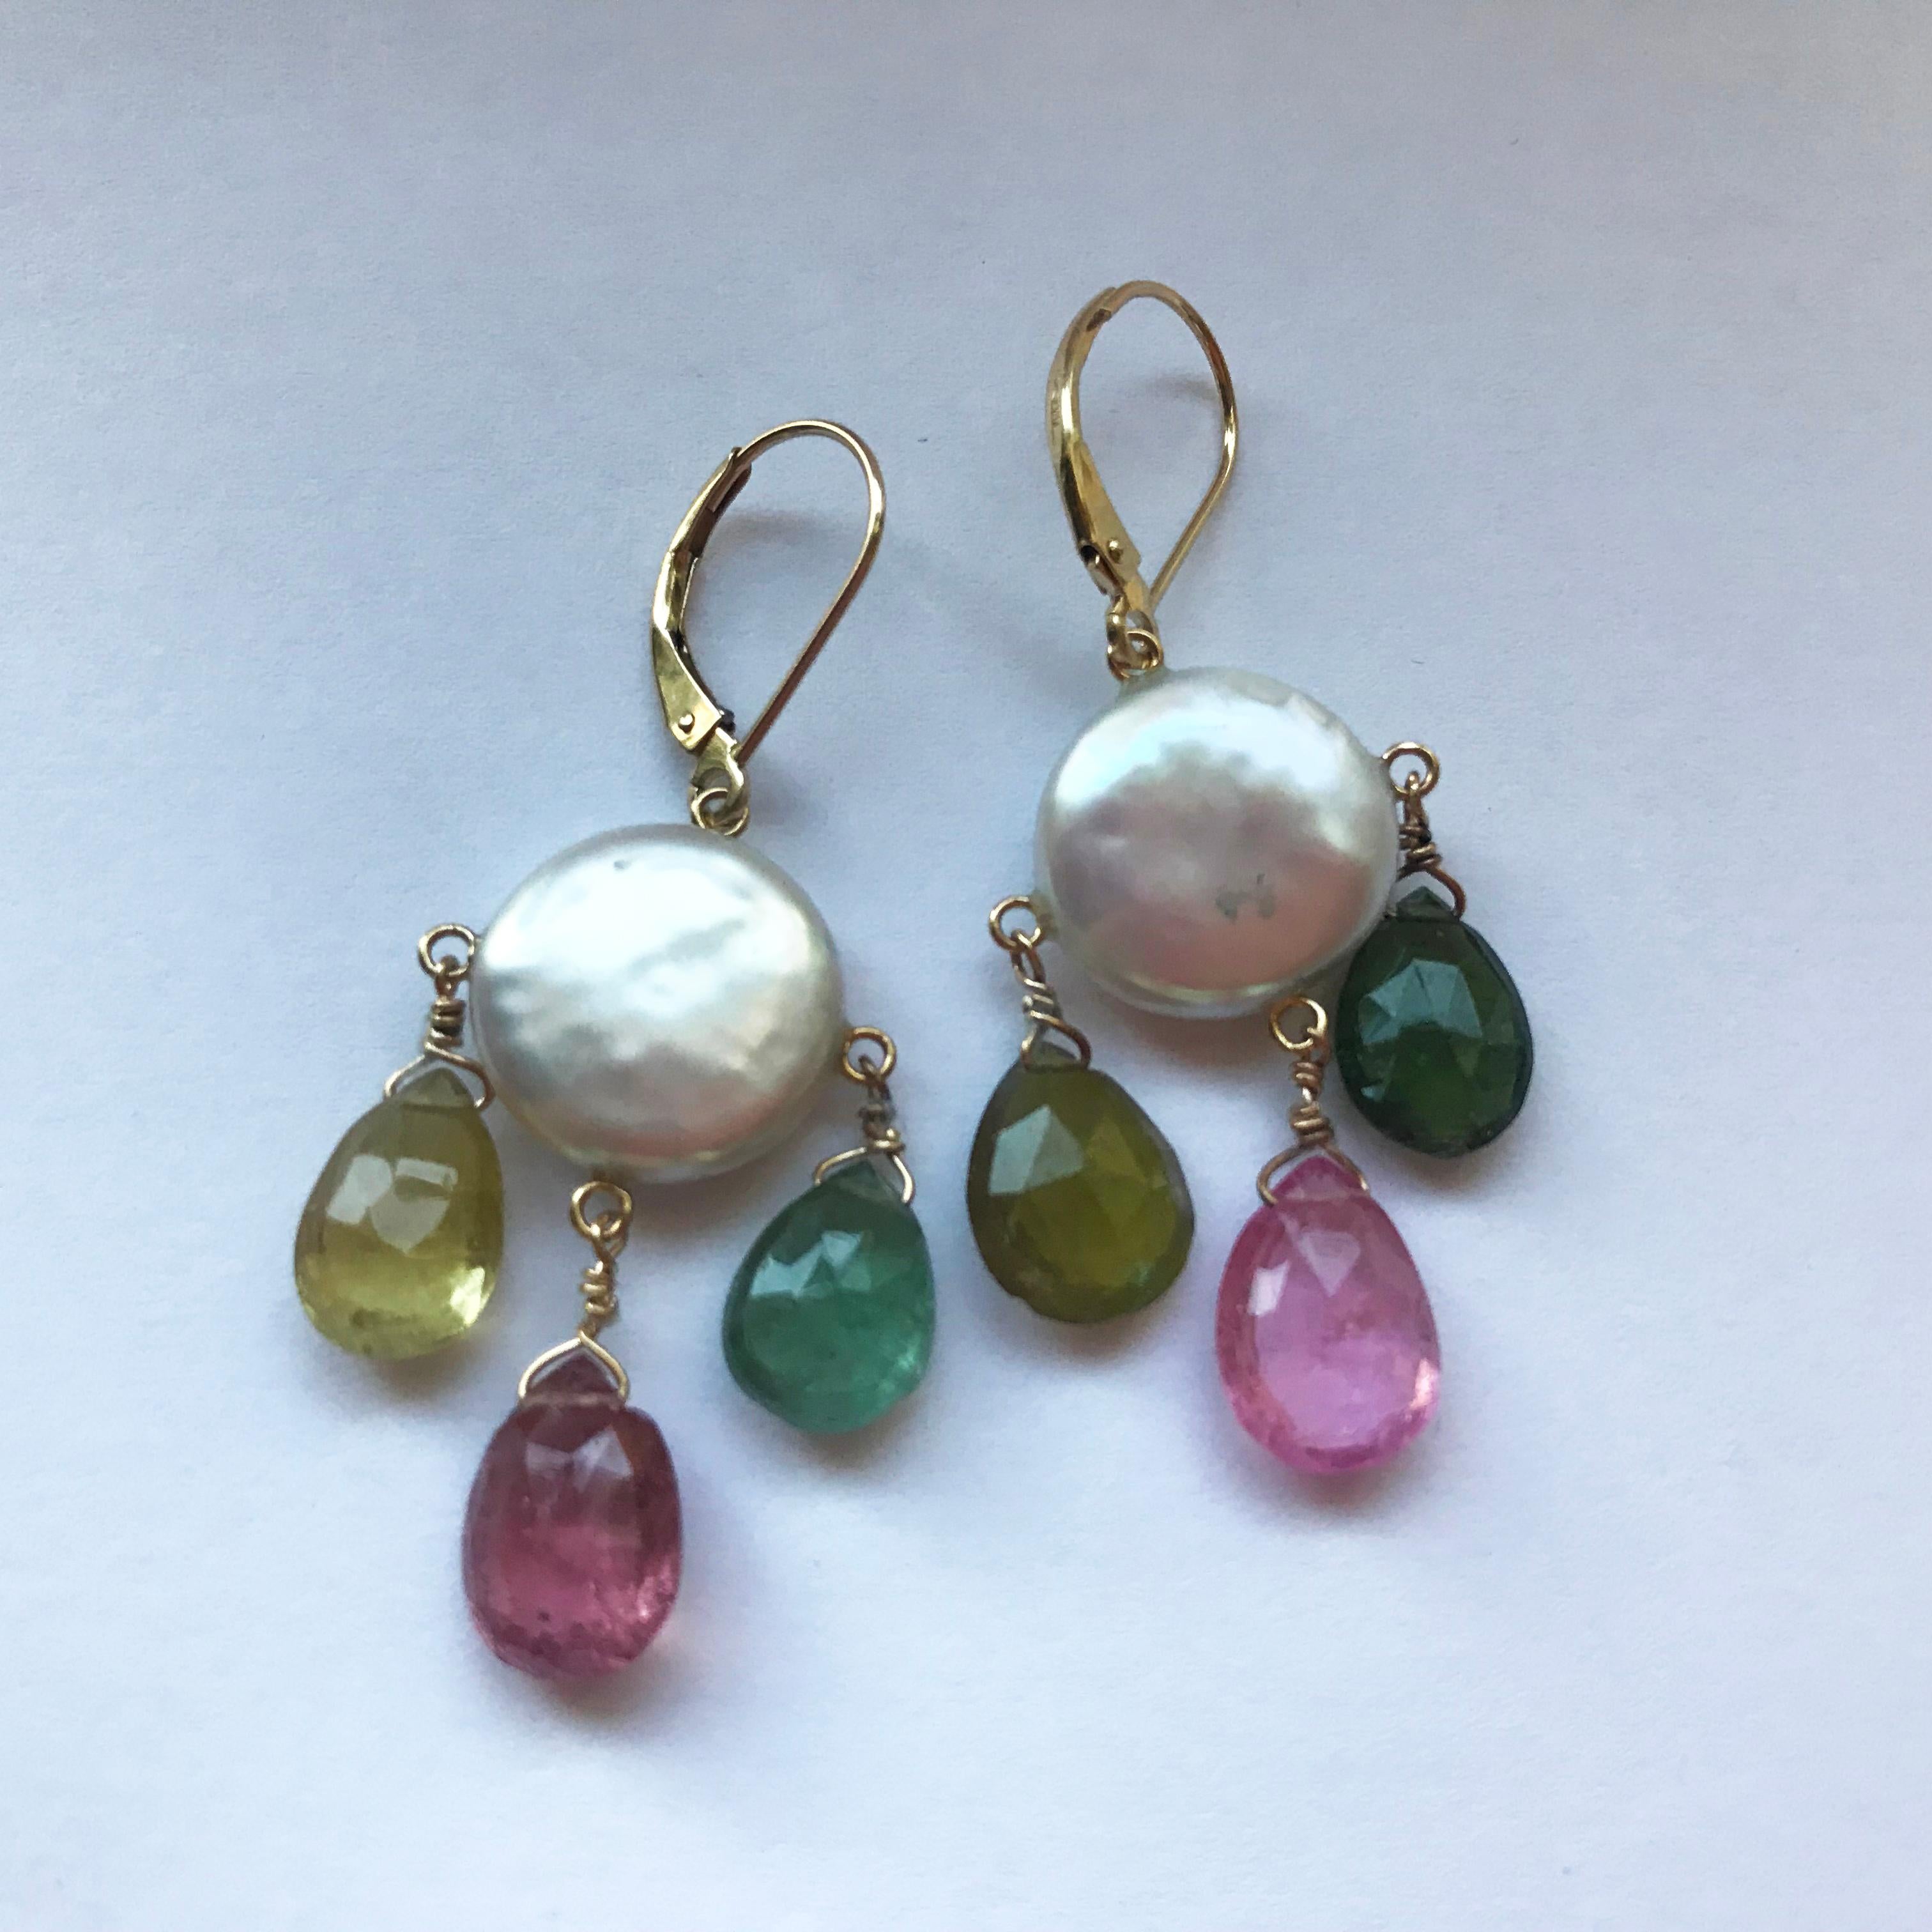 Marina J presents this fun but yet classical coin white pearls, with multi-colored tourmaline briolettes and 14k yellow gold wiring and lever backs. Inspired by a spring-themed color pallet, these elegant yet whimsical earrings are intentionally